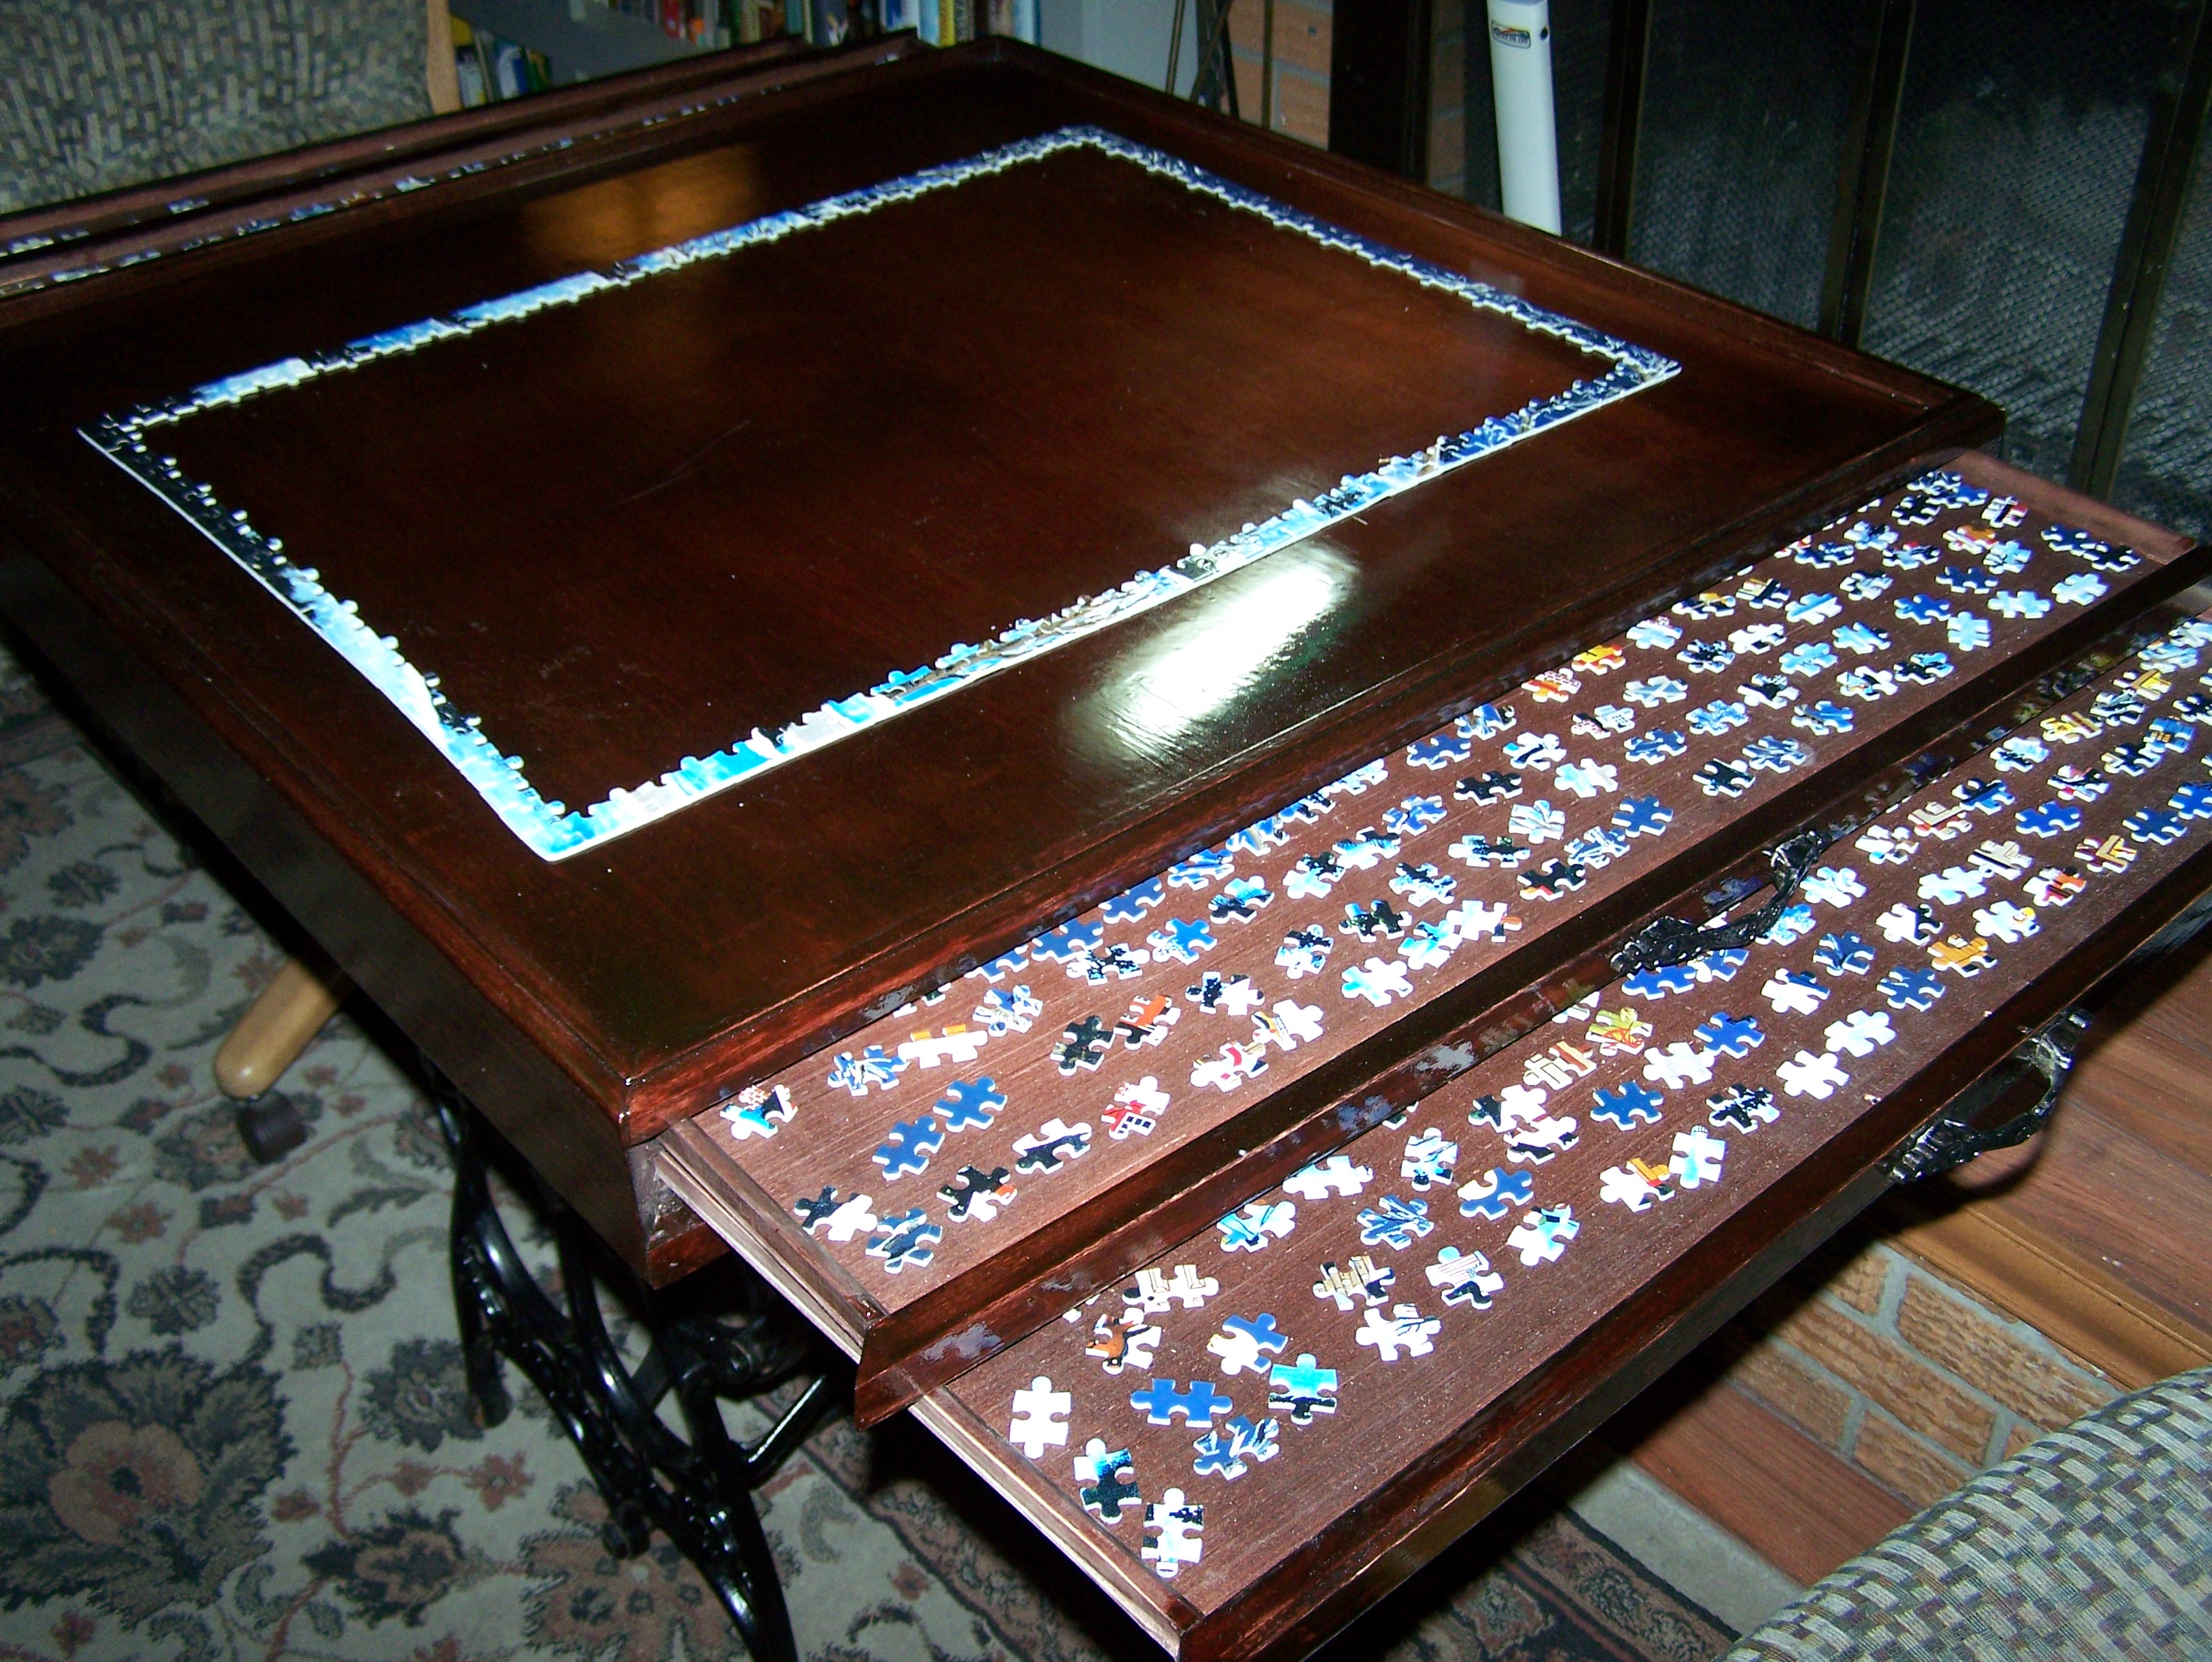 New and Improved Puzzle-Making Table - Quiltingboard Forums